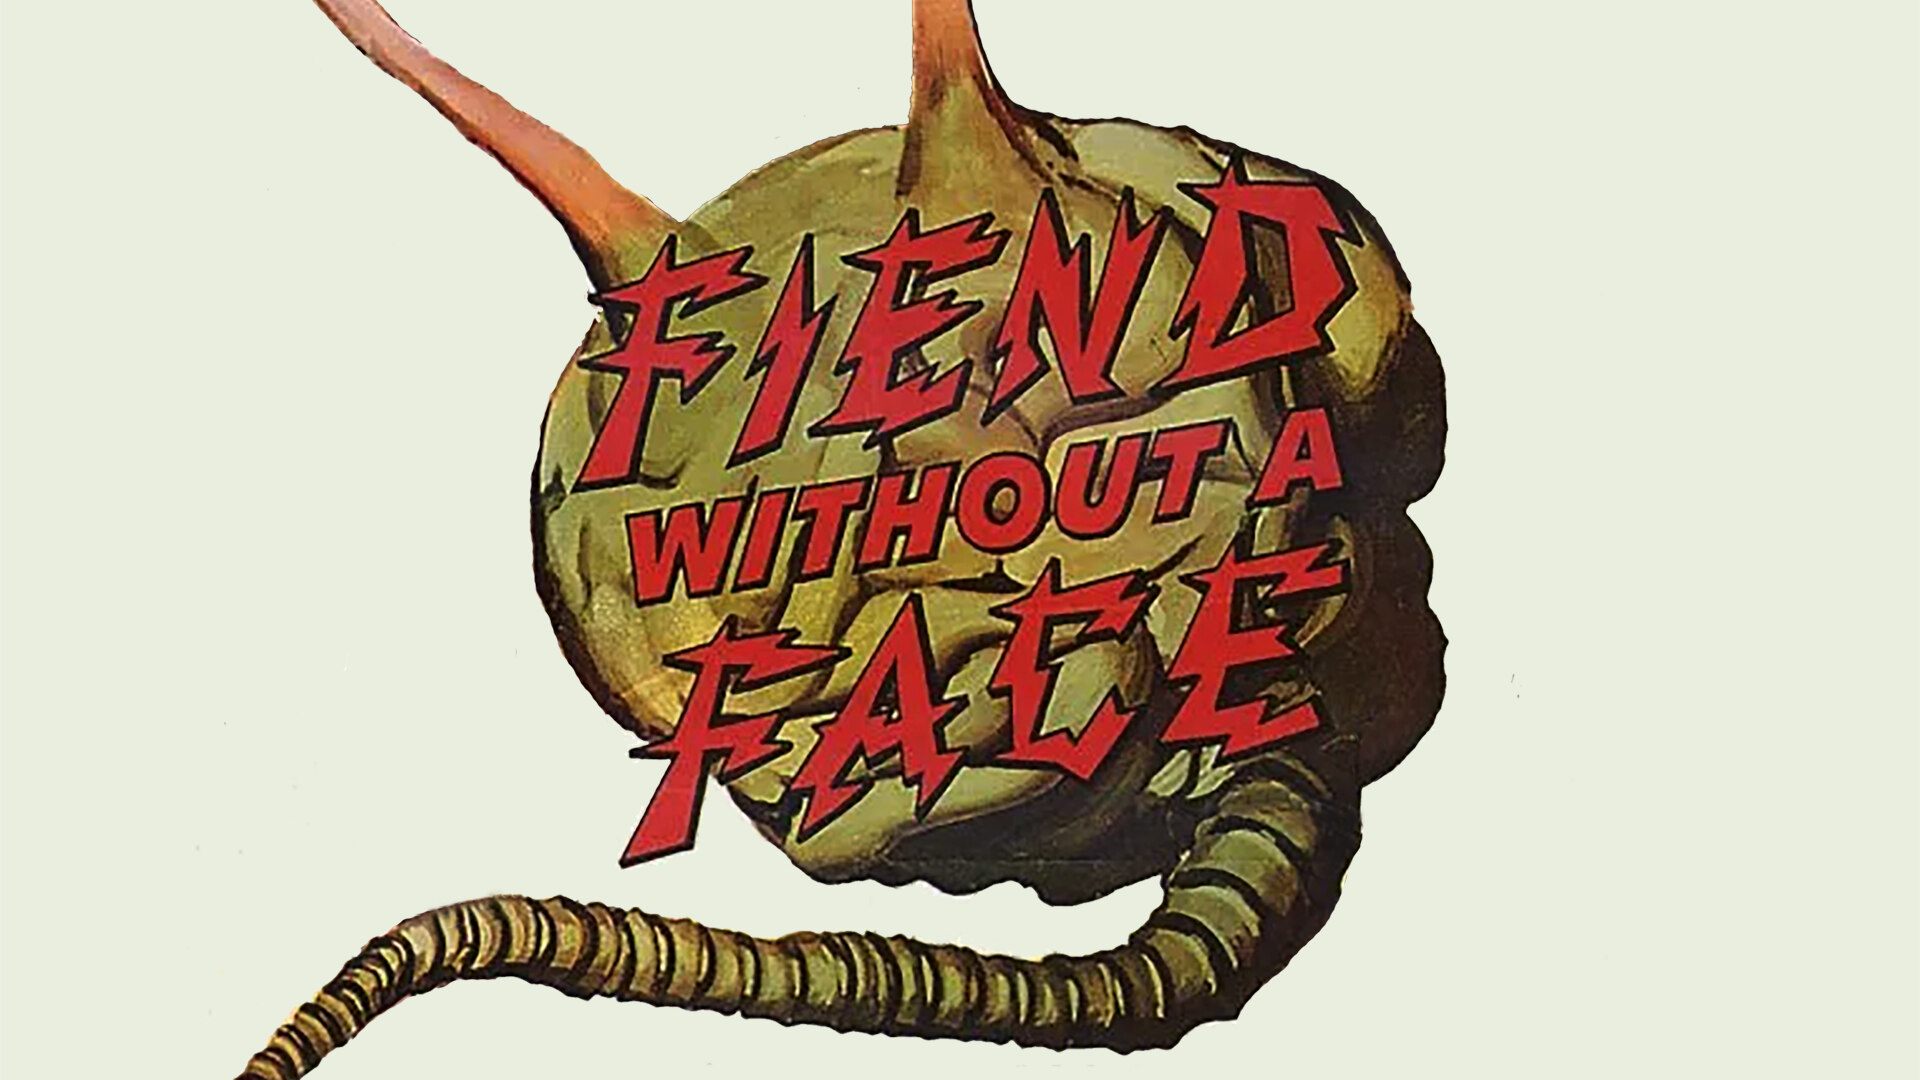 38-facts-about-the-movie-fiend-without-a-face